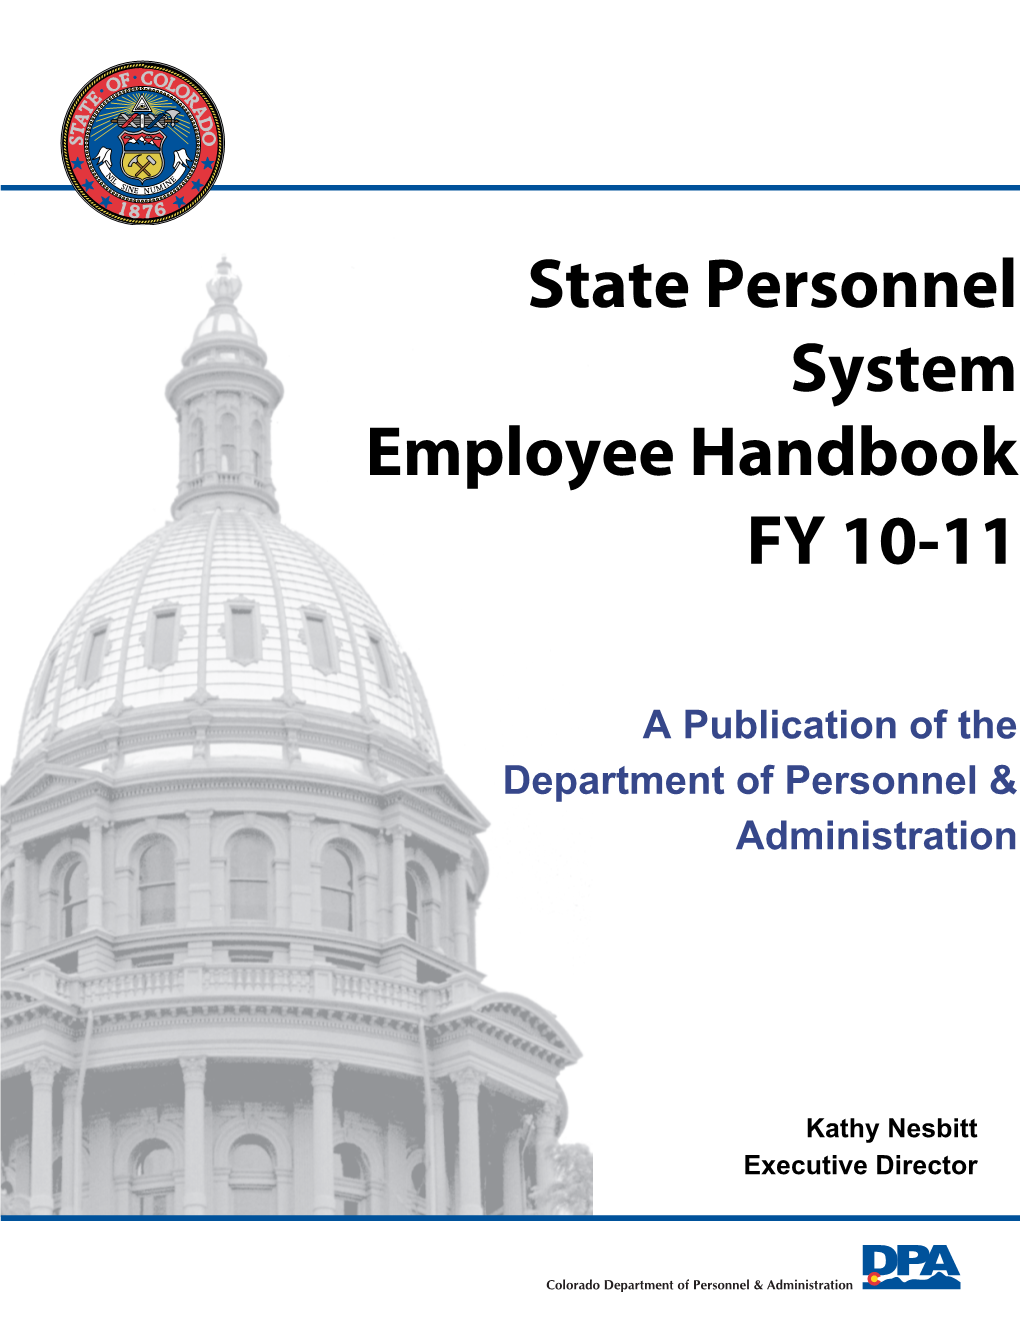 State Personnel System Employee Handbook FY 10-11